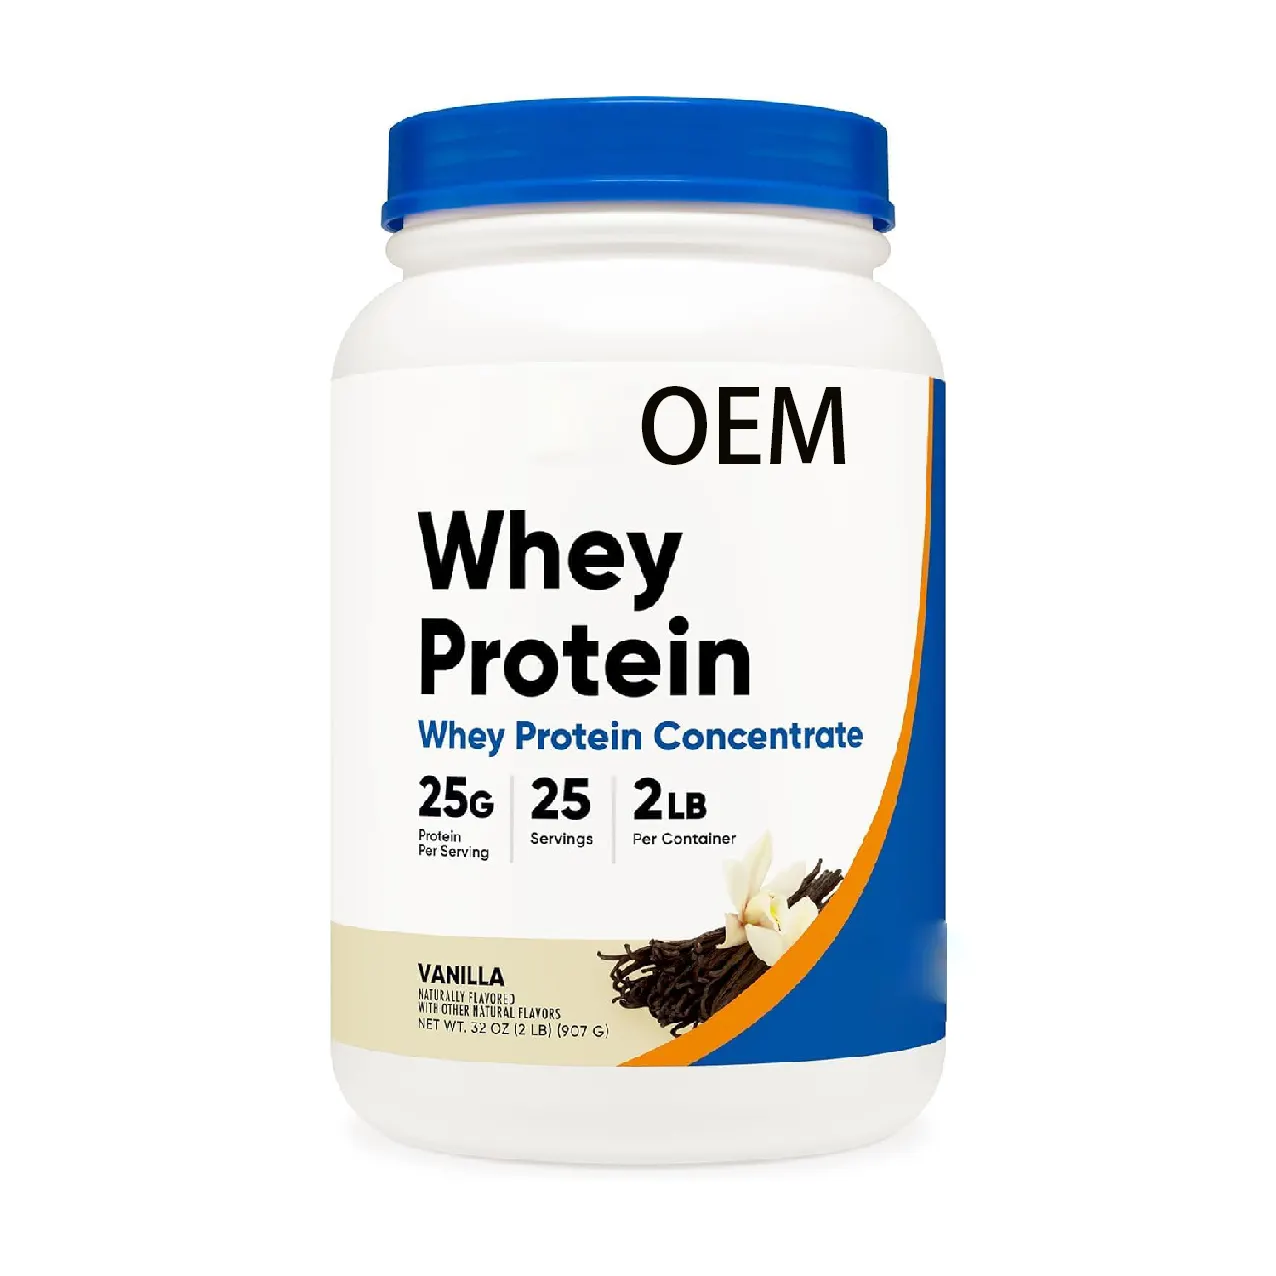 Whey Sport Nutrition Gym Concentrate Unflavored Fitness Protein Powder Whey Protein Powder Wholesale